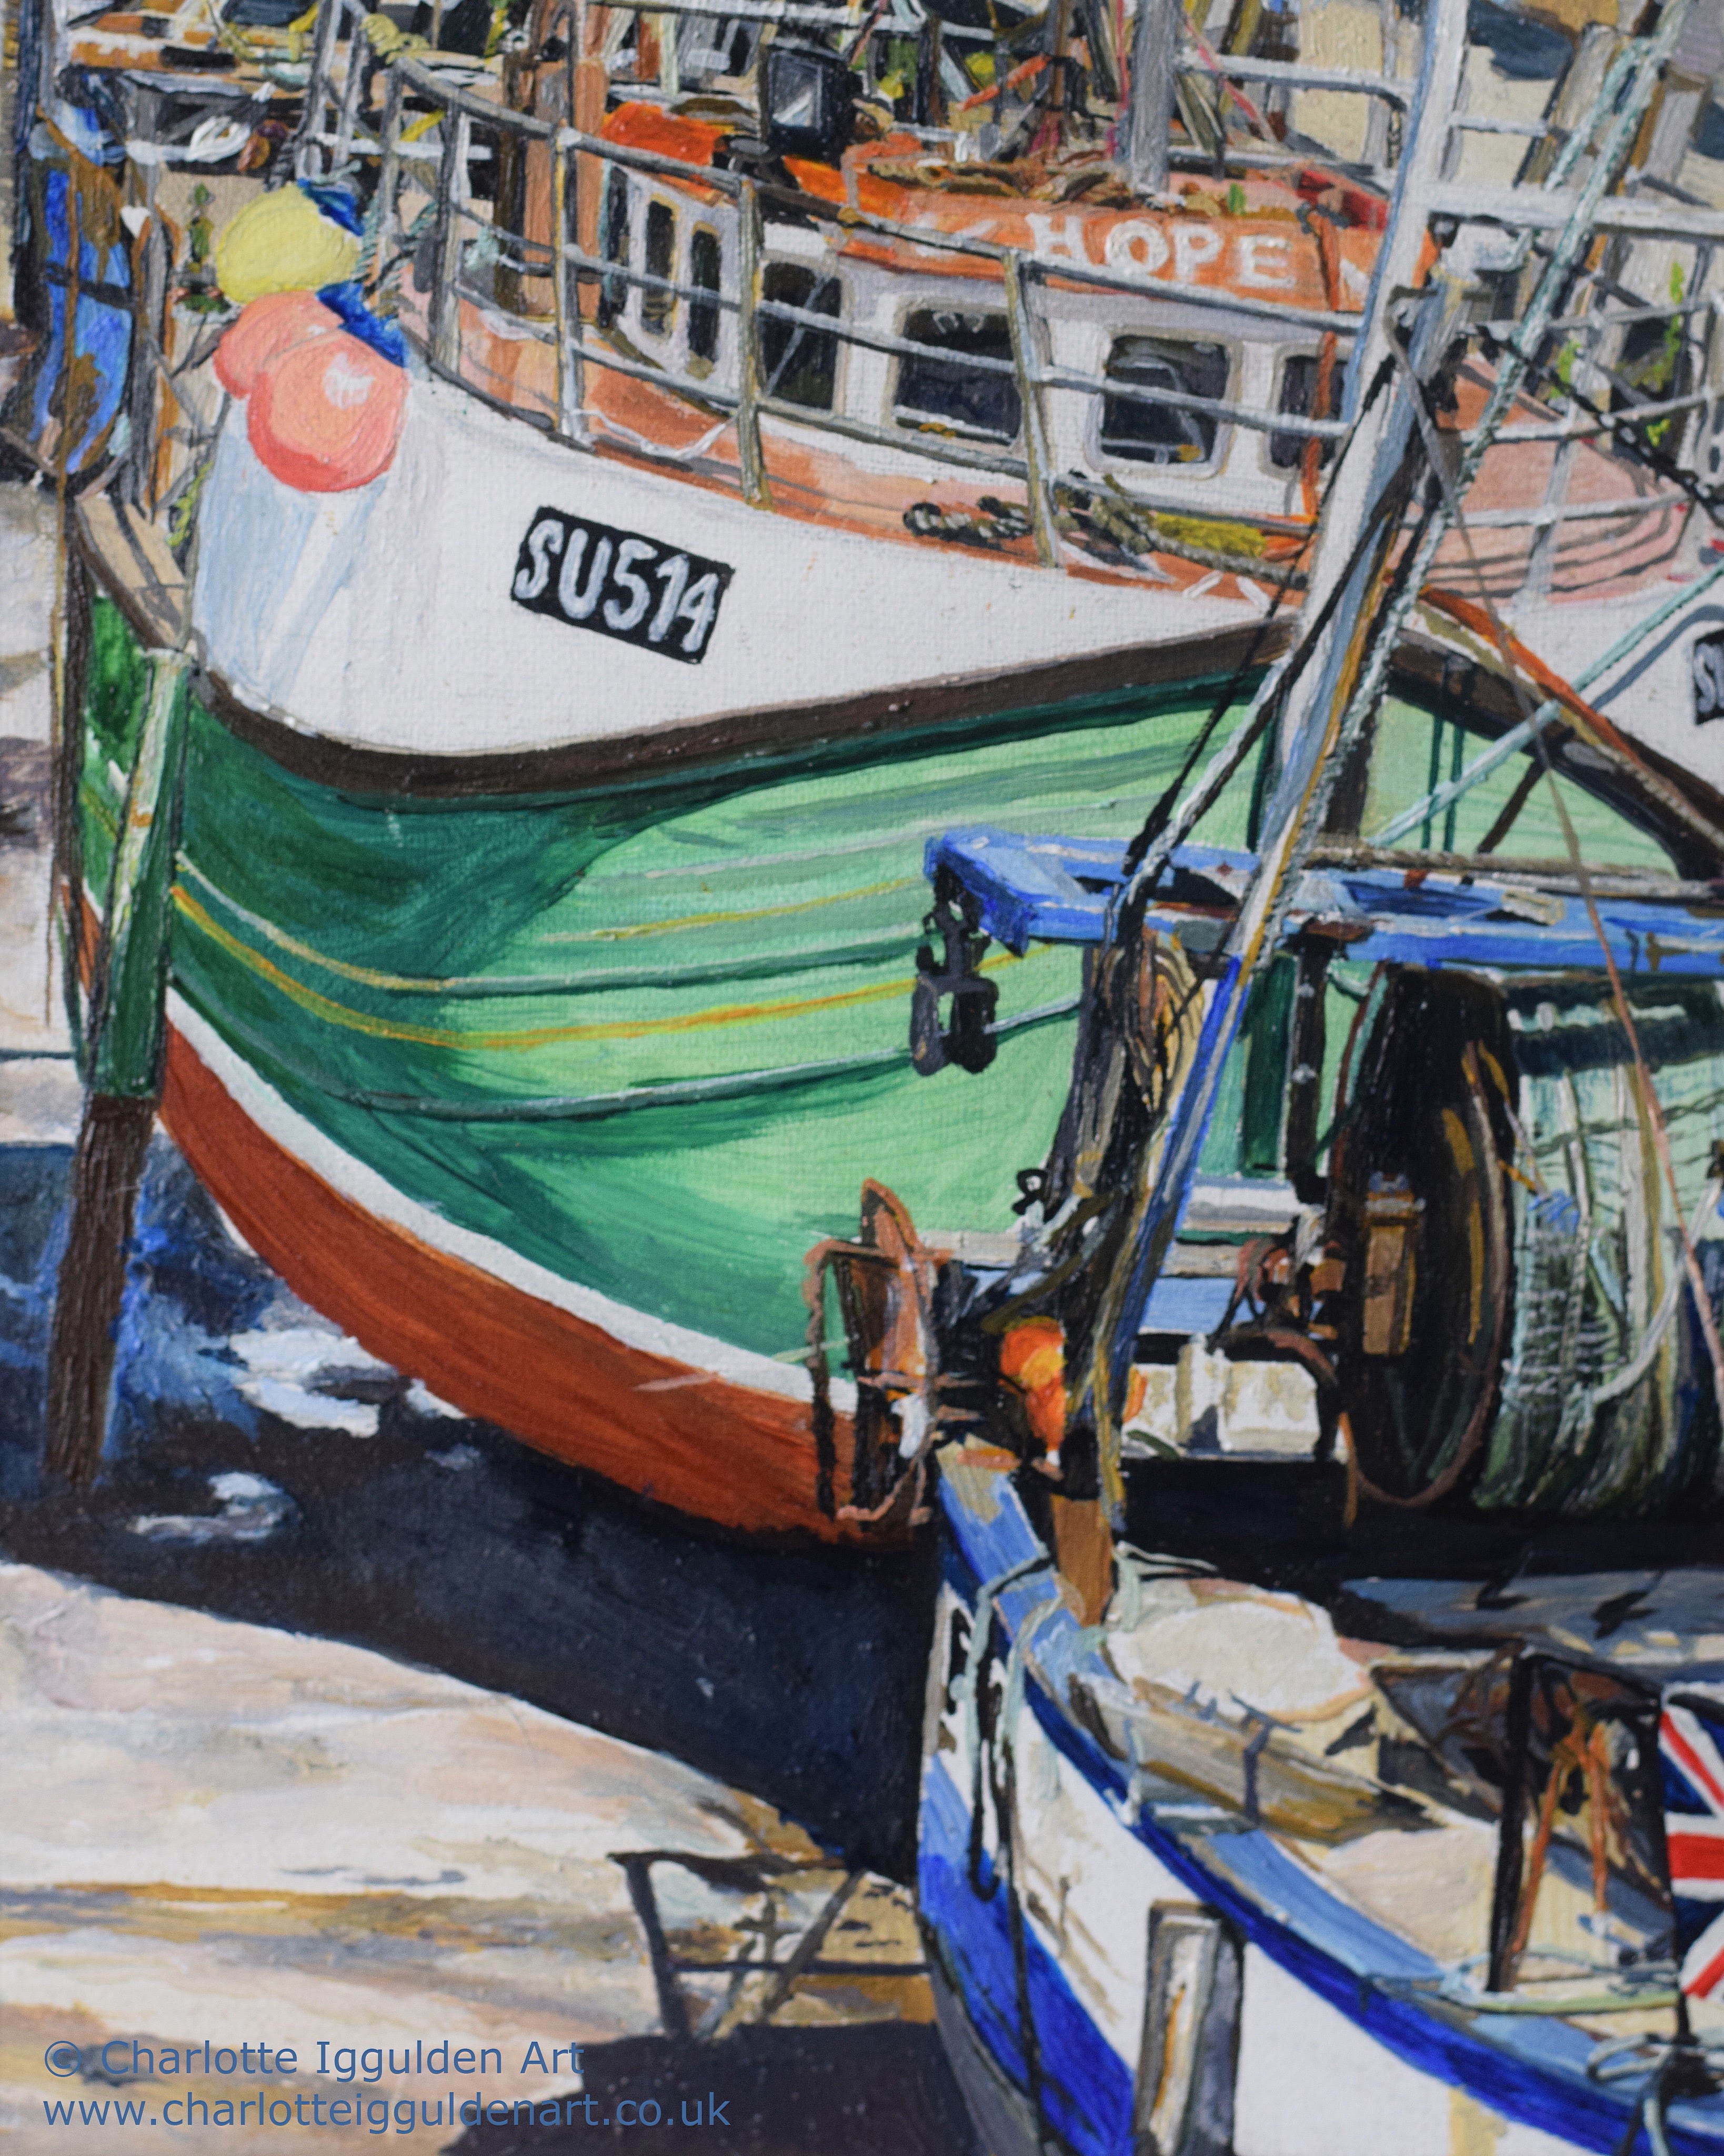 There is always Hope – art and conservation in Polperro